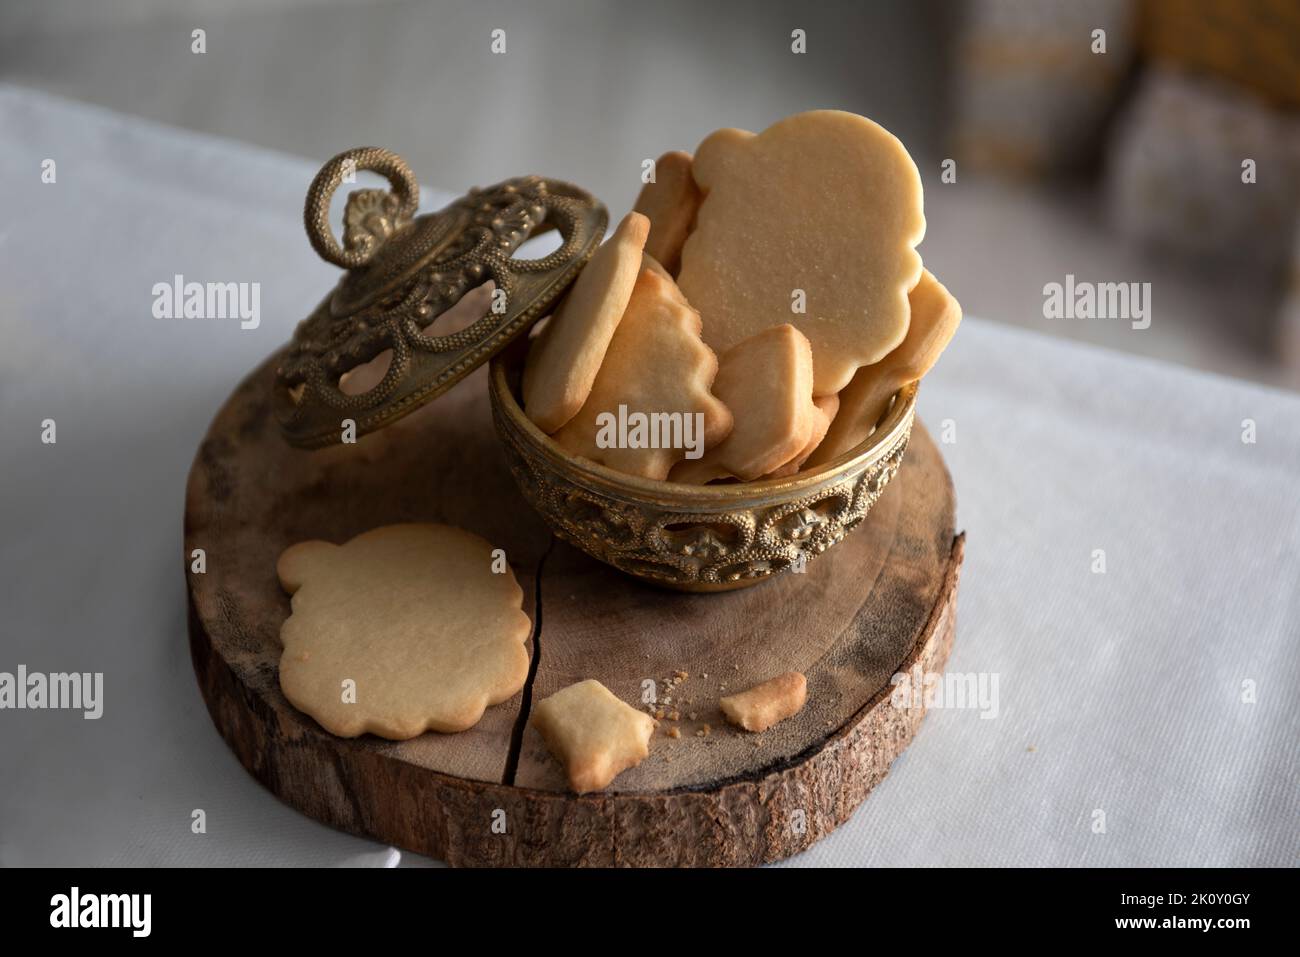 Homemade Christmas cookies in ceramic basket with festive decoration. Stock Photo